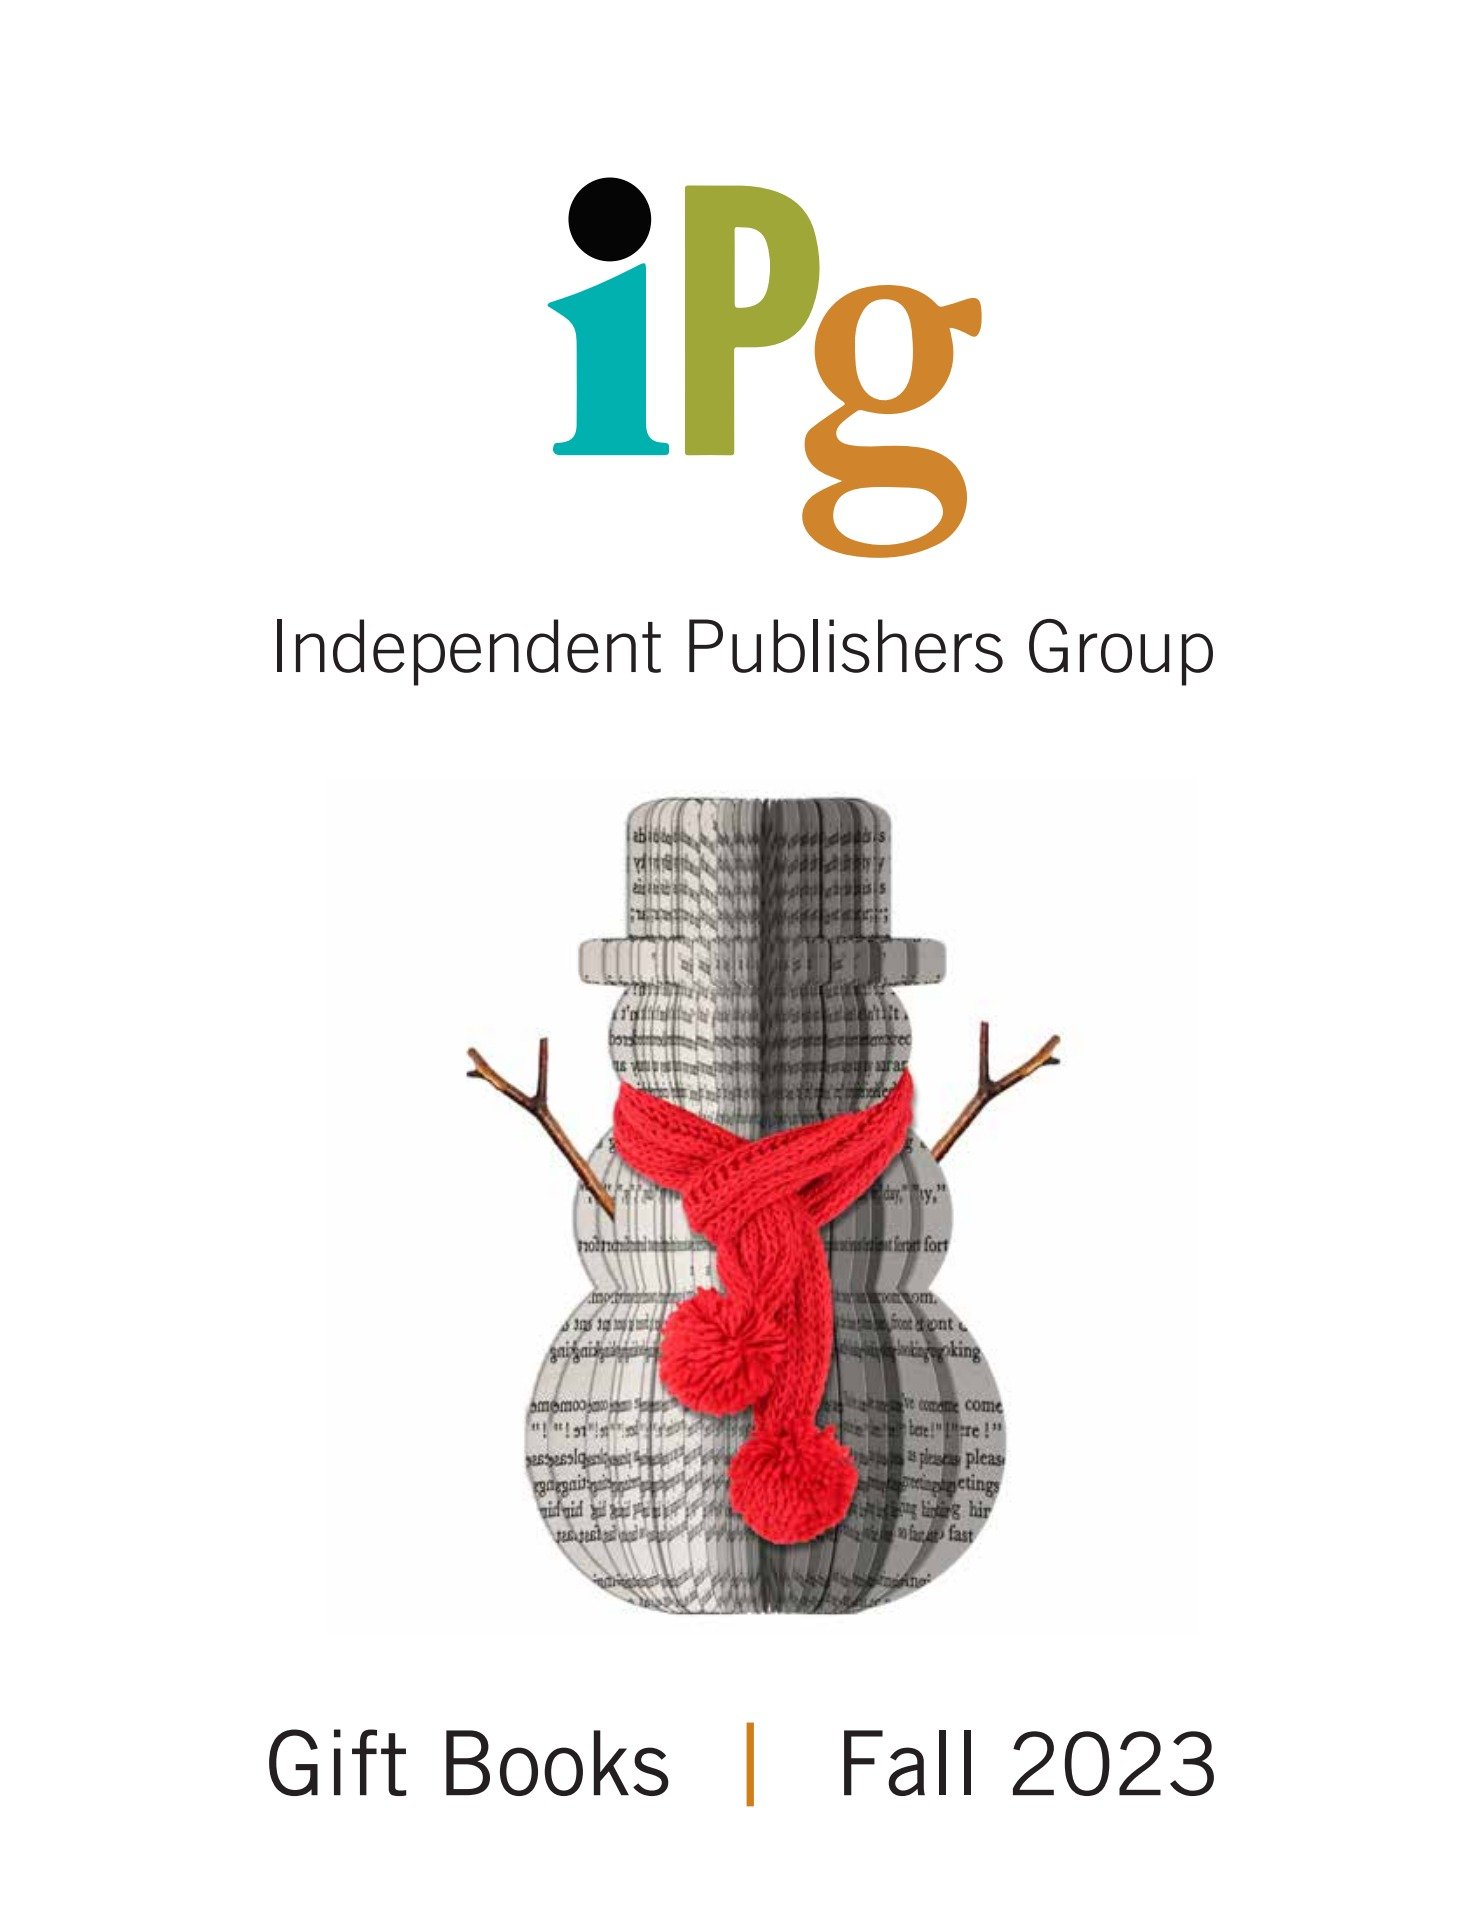 IPG: Independent Publishers Group